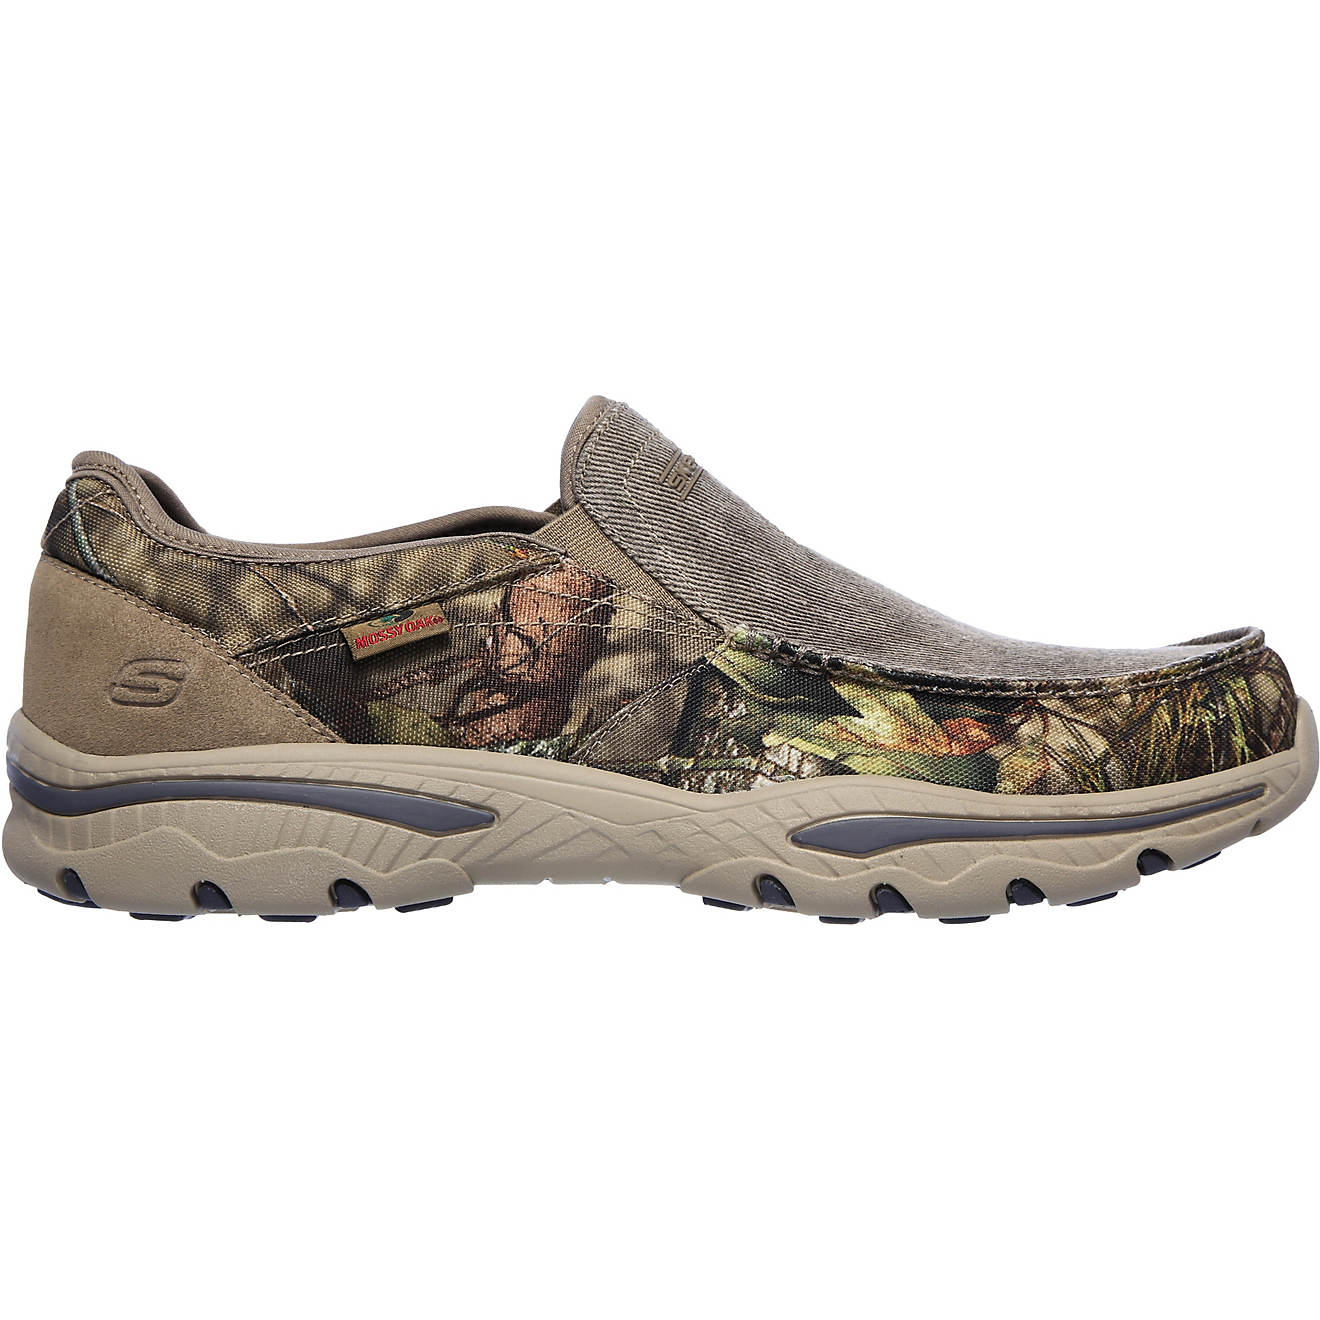 SKECHERS Men’s Relaxed fit Creston Moseco Slip-On Shoes | Academy